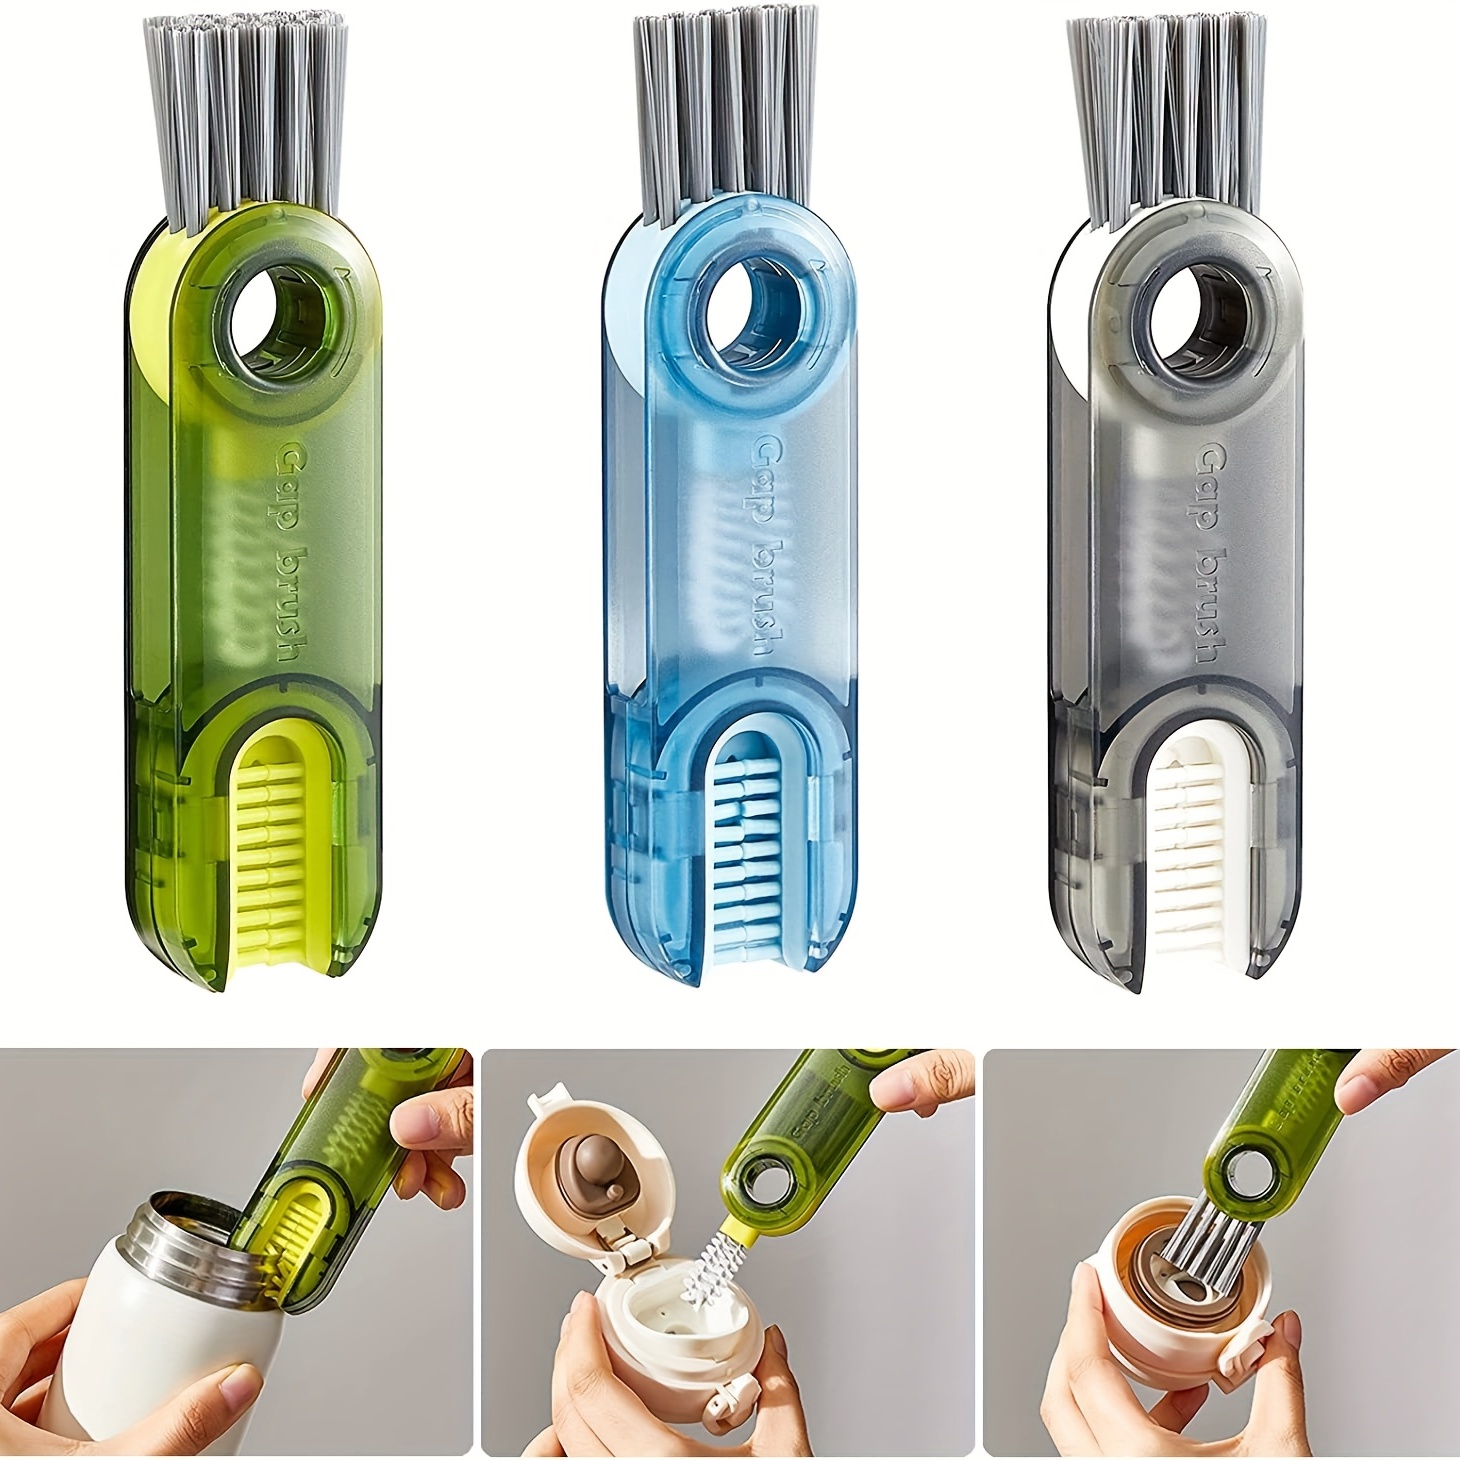 Tiny 3 in 1 Cleaning Brush, Mini Multi-Functional Crevice Cleaning